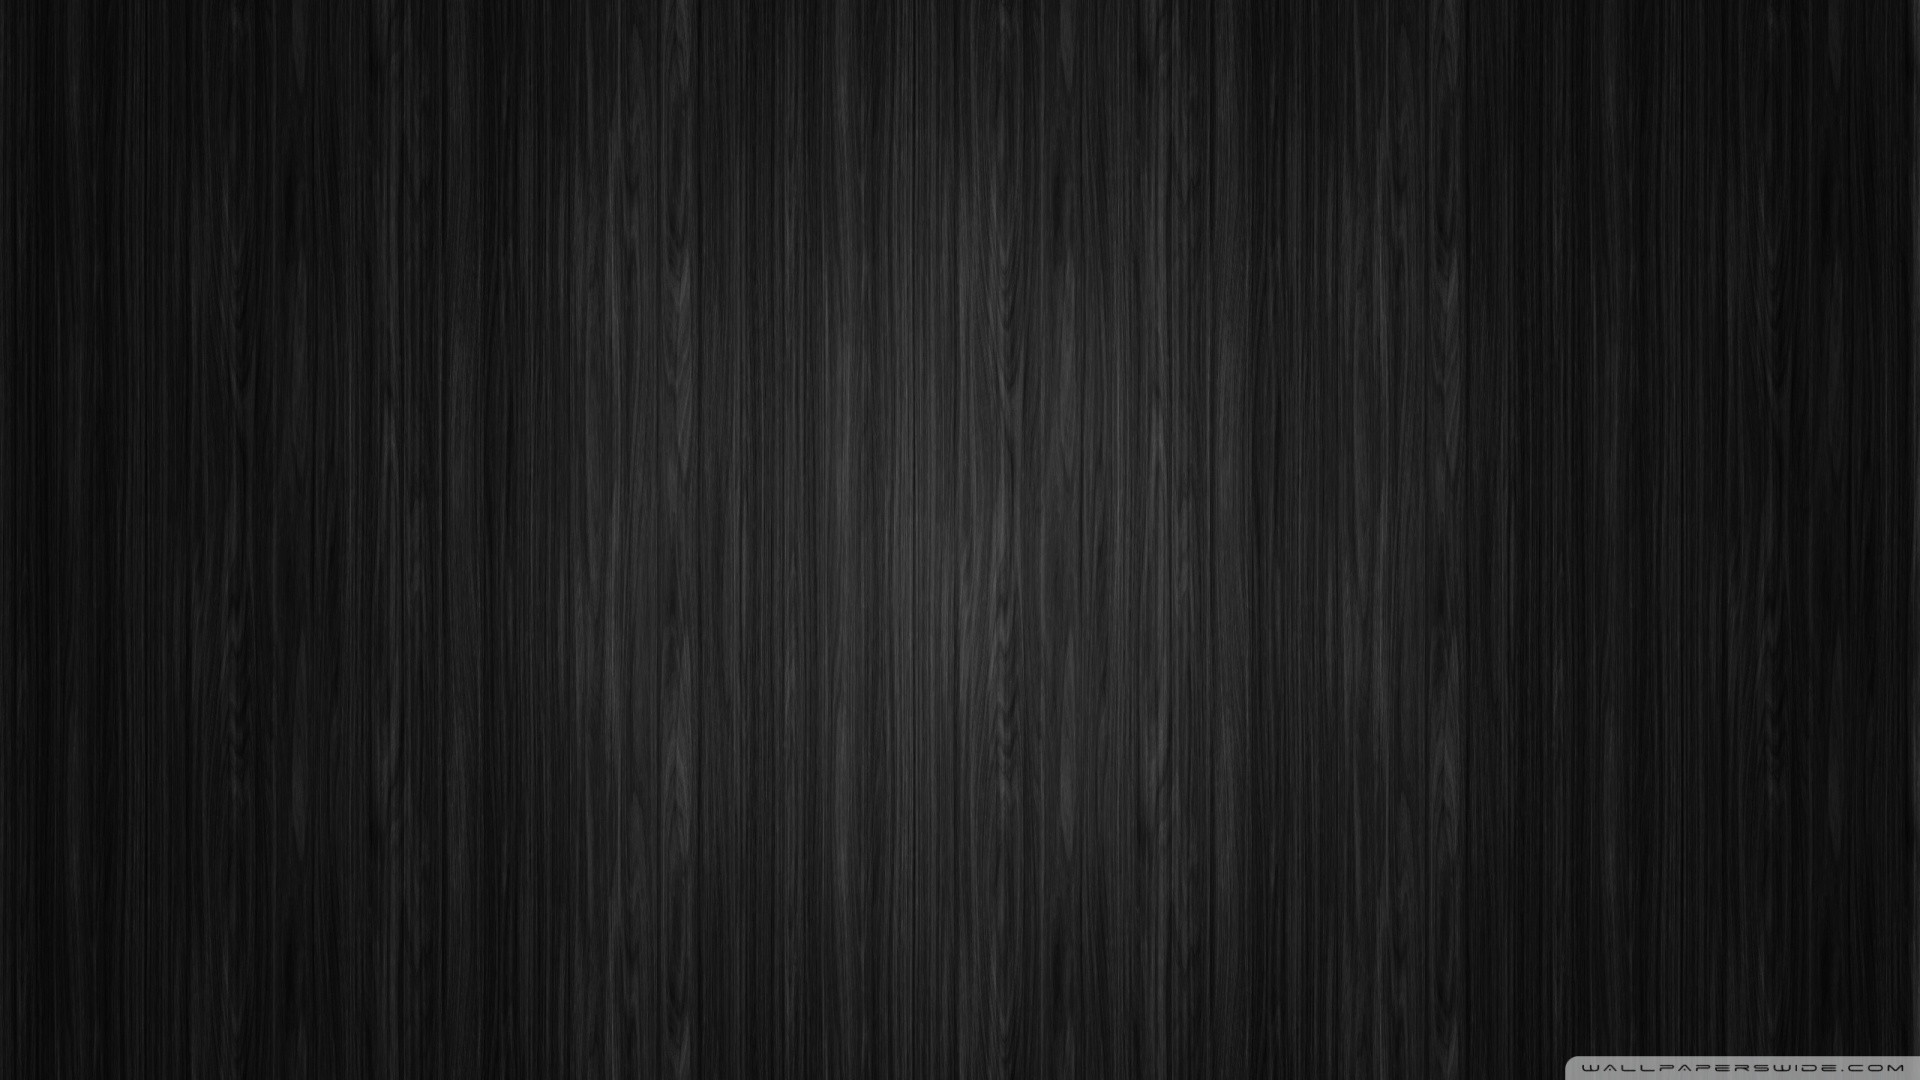 1920x1080 ... Wood-Background-Pictures-Free-Download